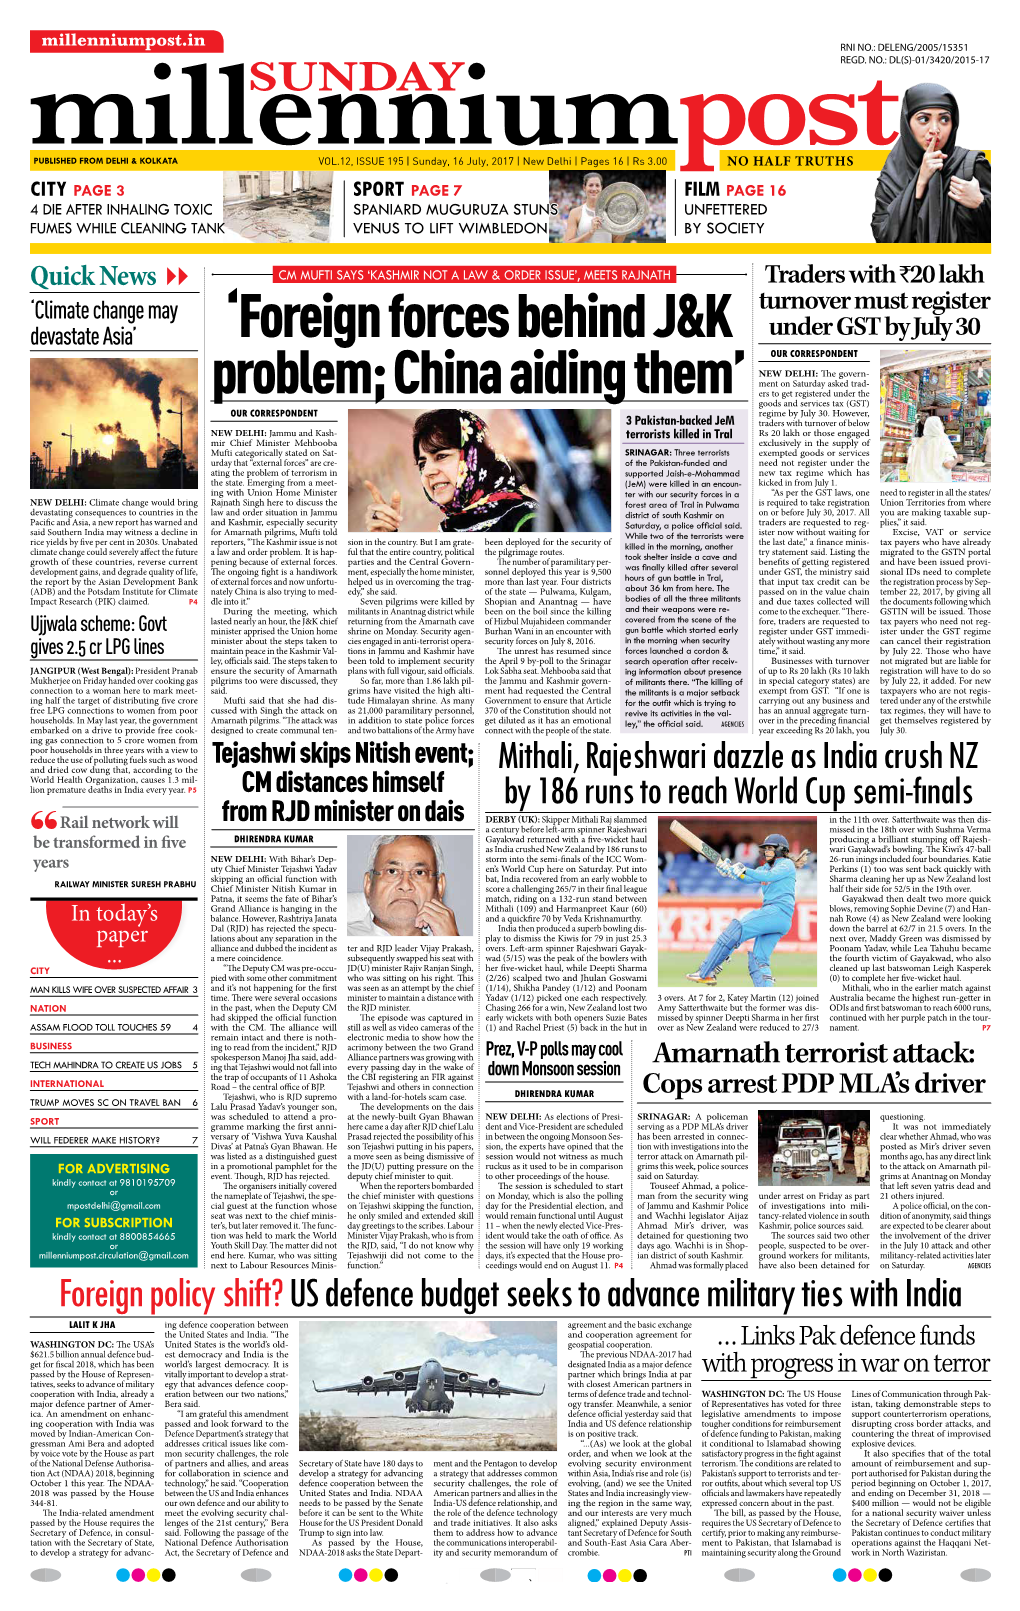 'Foreign Forces Behind J&K Problem; China Aiding Them'